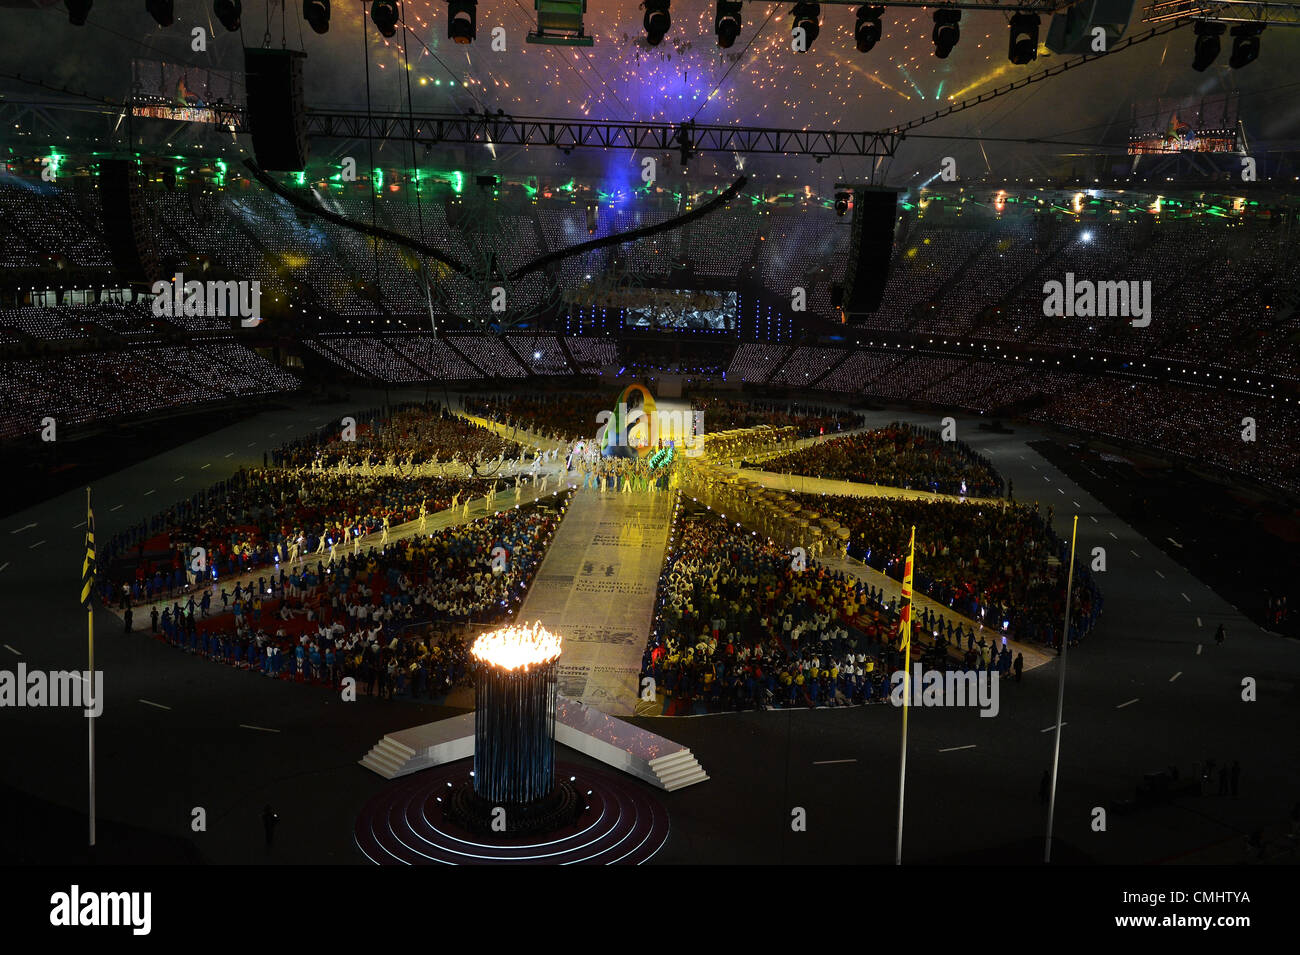 LONDON, ENGLAND - AUGUST 12, a general view during the closing ceremony of the London 2012 Olympic Games at the Olympic Park stadium, on August 12, 2012 in London, England Photo by Roger Sedres / Gallo Images Stock Photo